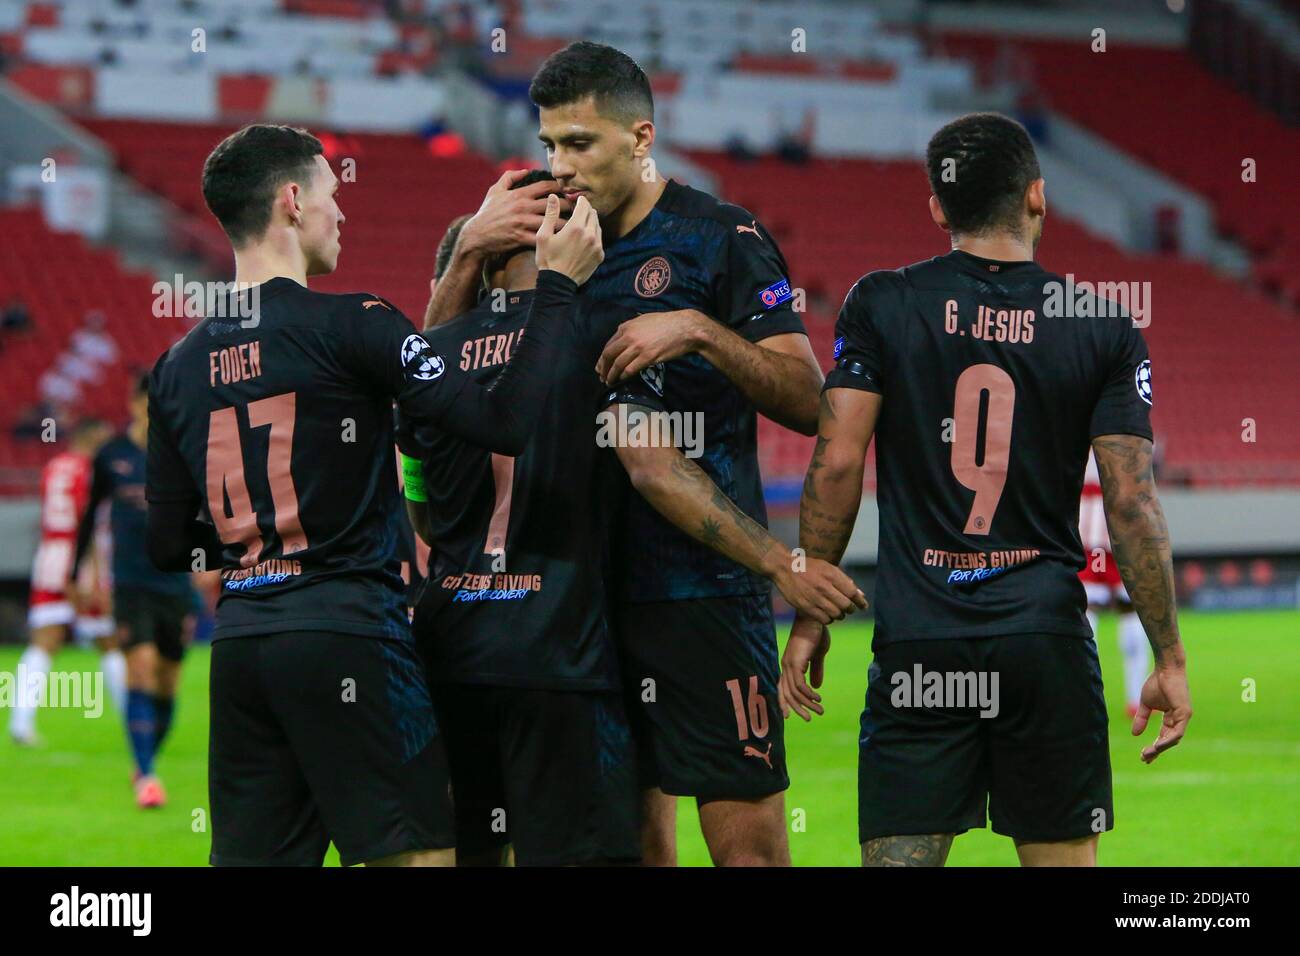 PIRAEUS, GREECE - NOVEMBER 25: Phil Foden of Manchester City celebrates his goal with his teammates during the UEFA Champions League Group C stage match between Olympiacos FC and Manchester City at Karaiskakis Stadium on November 25, 2020 in Piraeus, Greece. (Photo by MB Media) Stock Photo